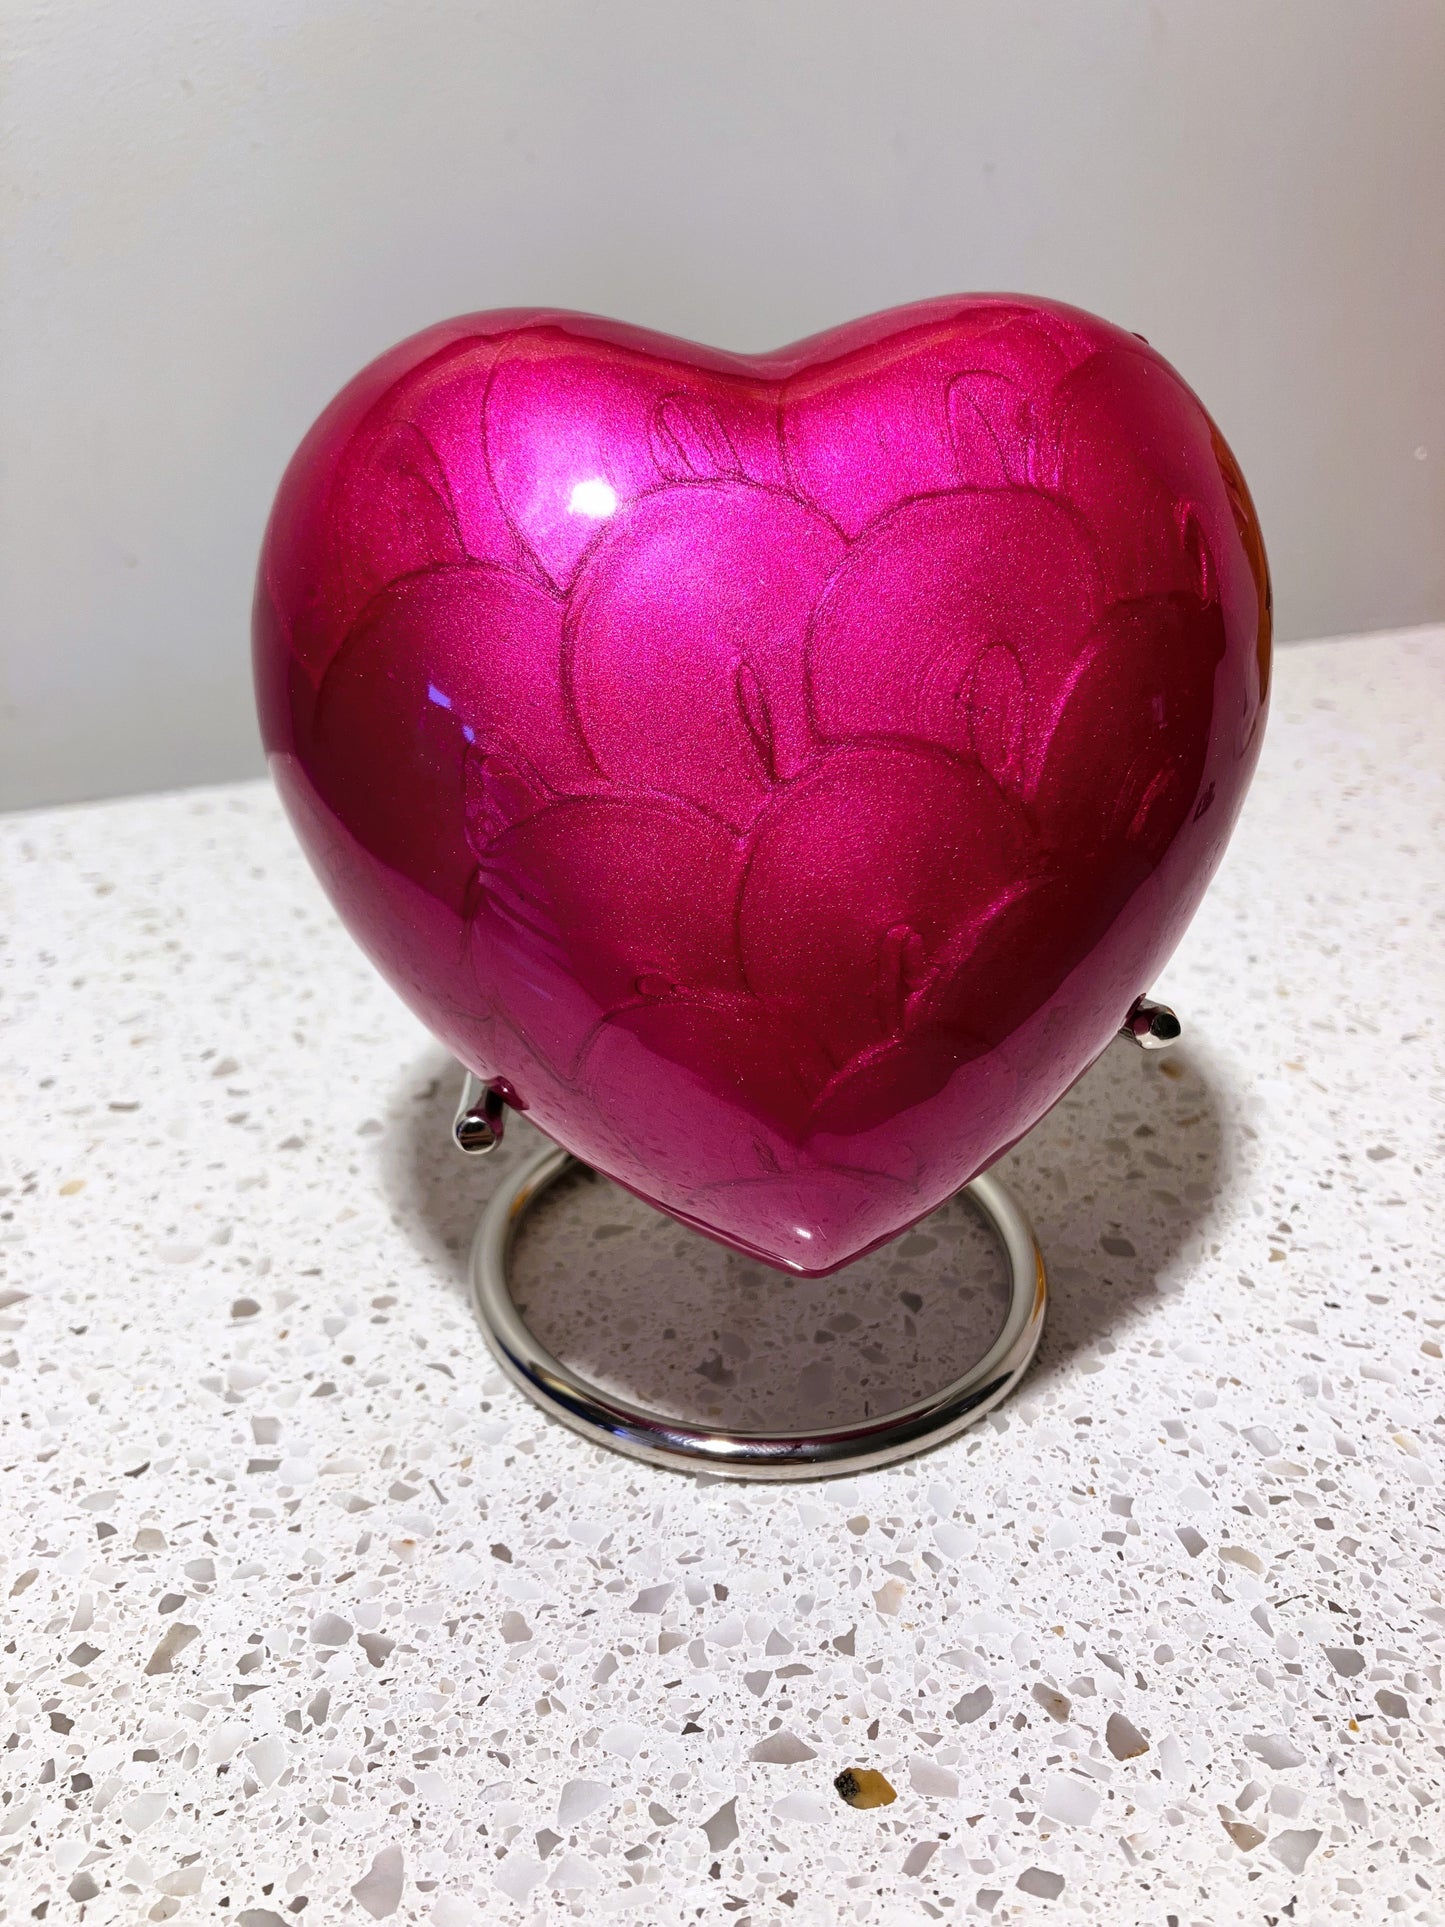 Umutima Heart Keepsake Ashes Urn-Pet Urn for Ashes-Cremation Urns- The cremation urns for ashes and keepsakes for ashes come in a variety of styles to suit most tastes, decor and different volumes of funeral ashes.